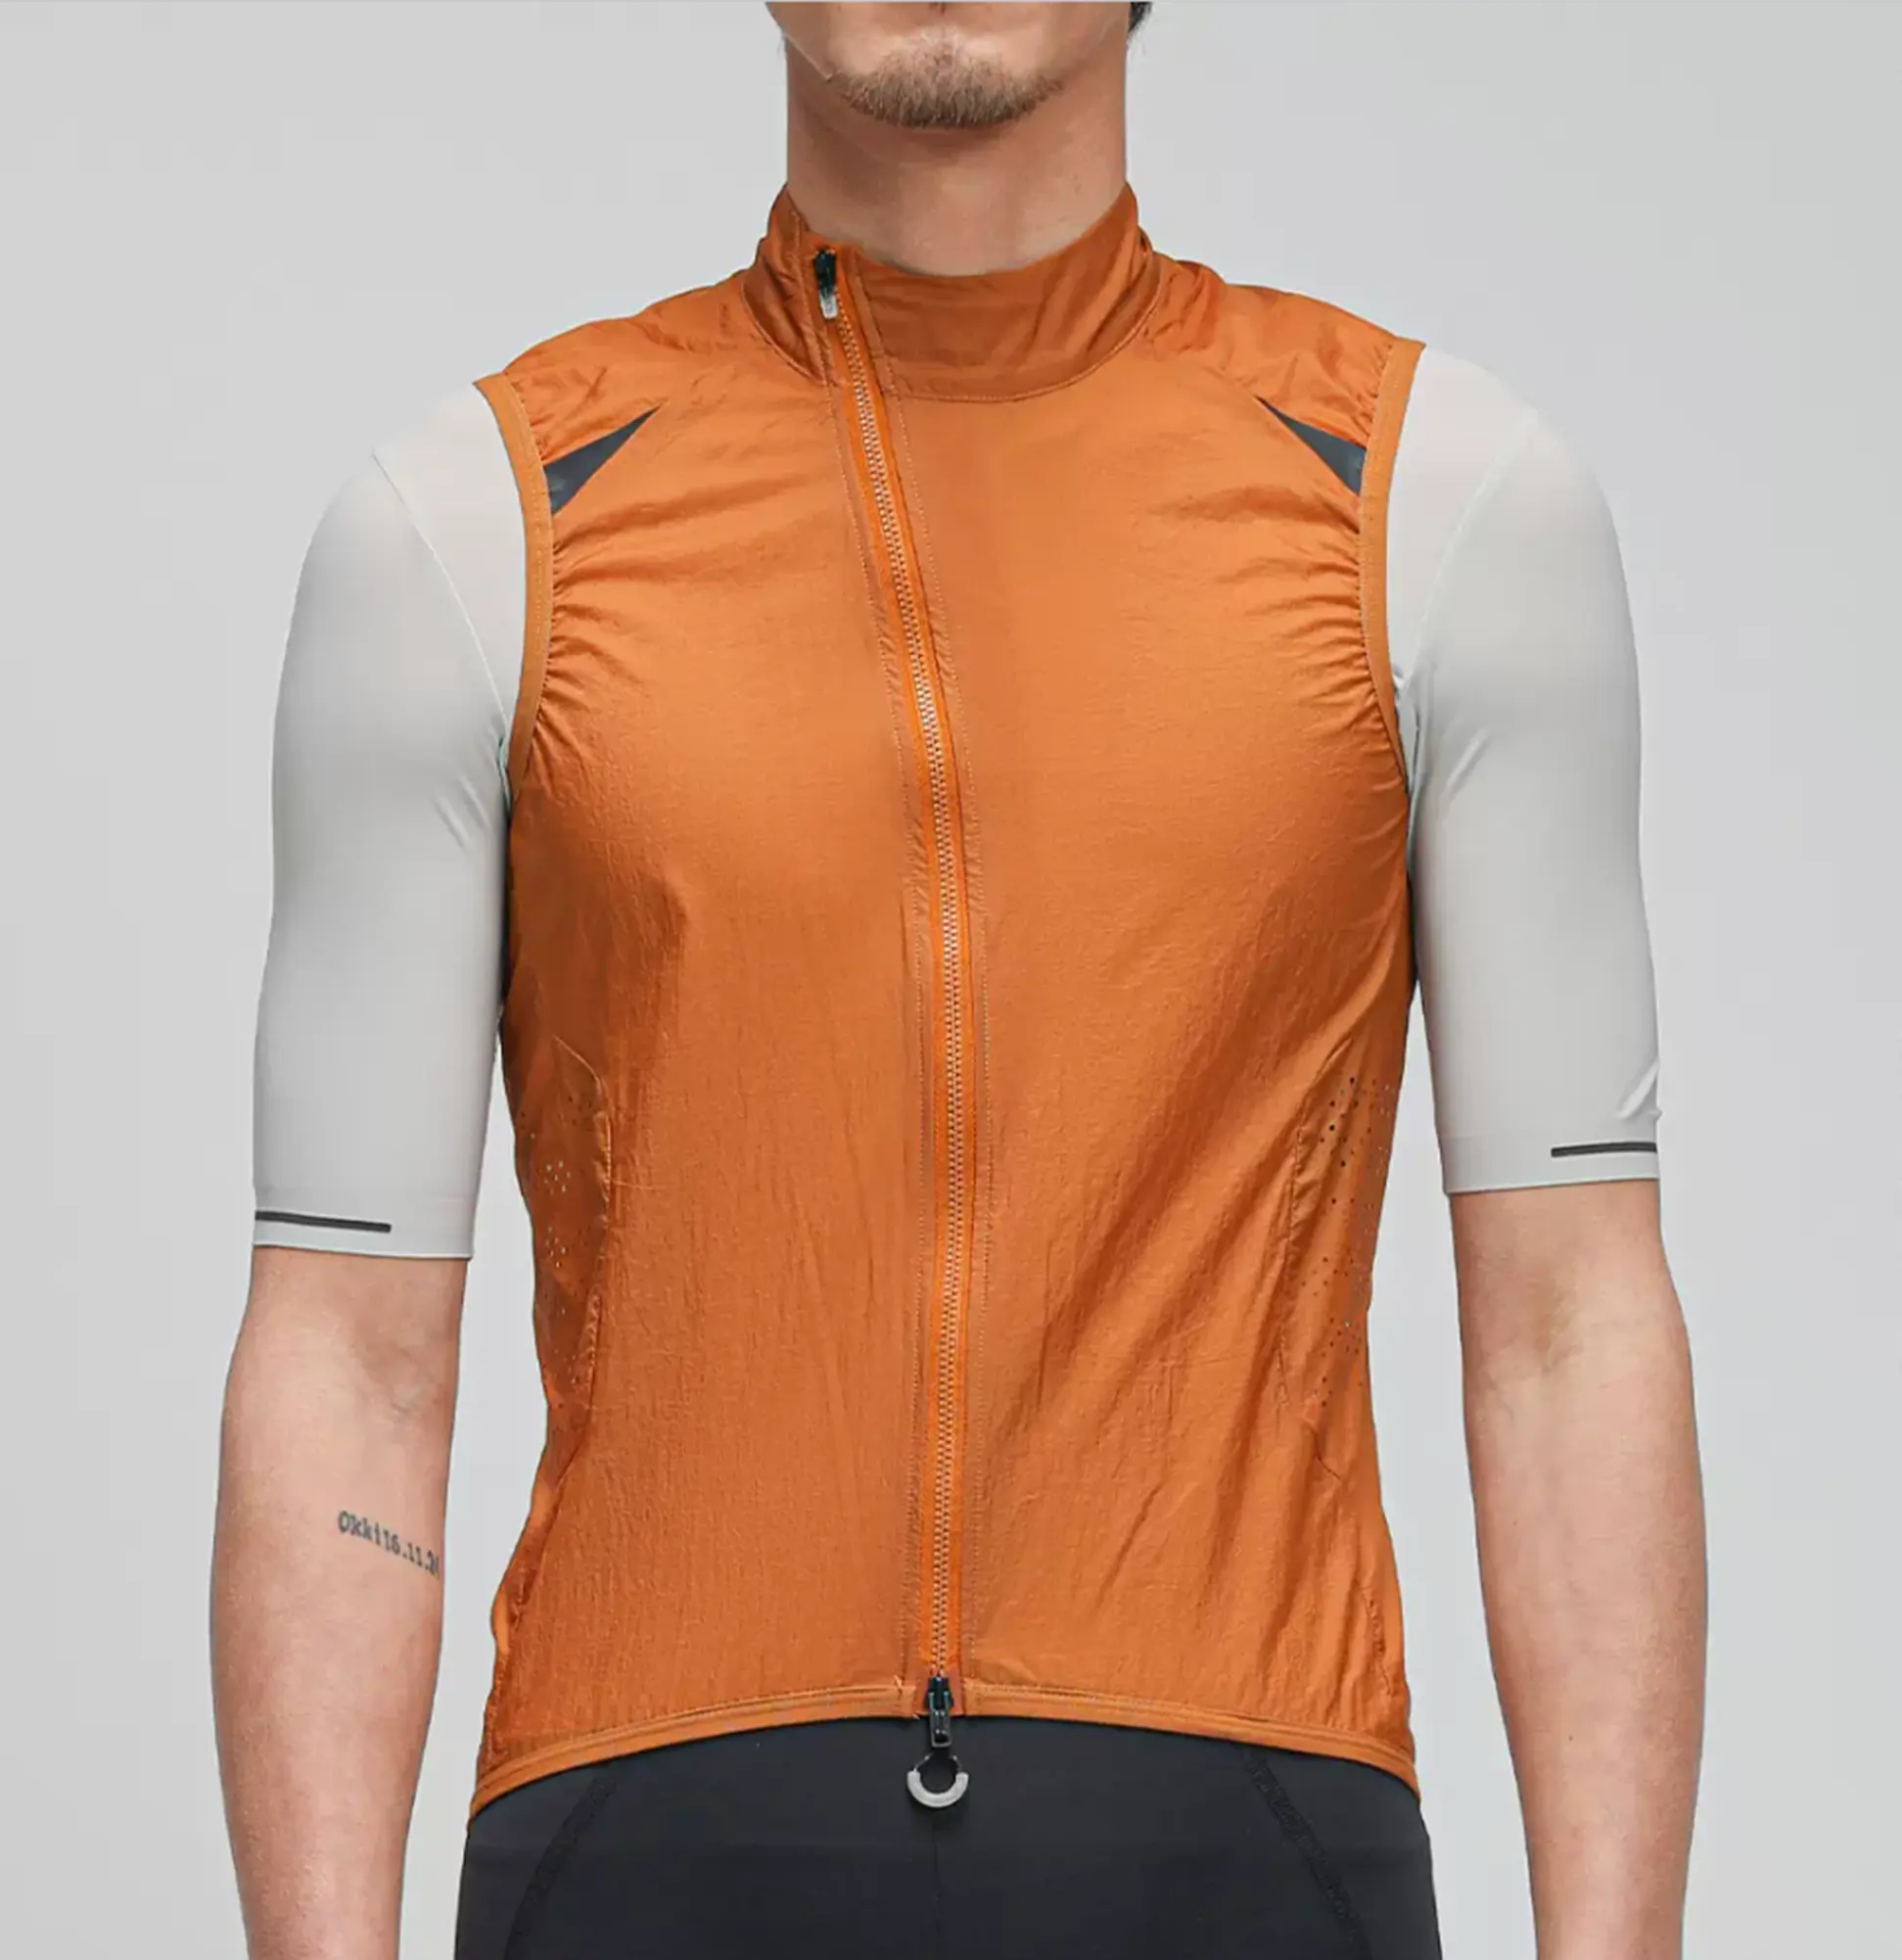 Men's Lightweight Wear-resistant Cycling Vest Breathable Wind-proof Water-proof Cycling Jersey Vest For Men